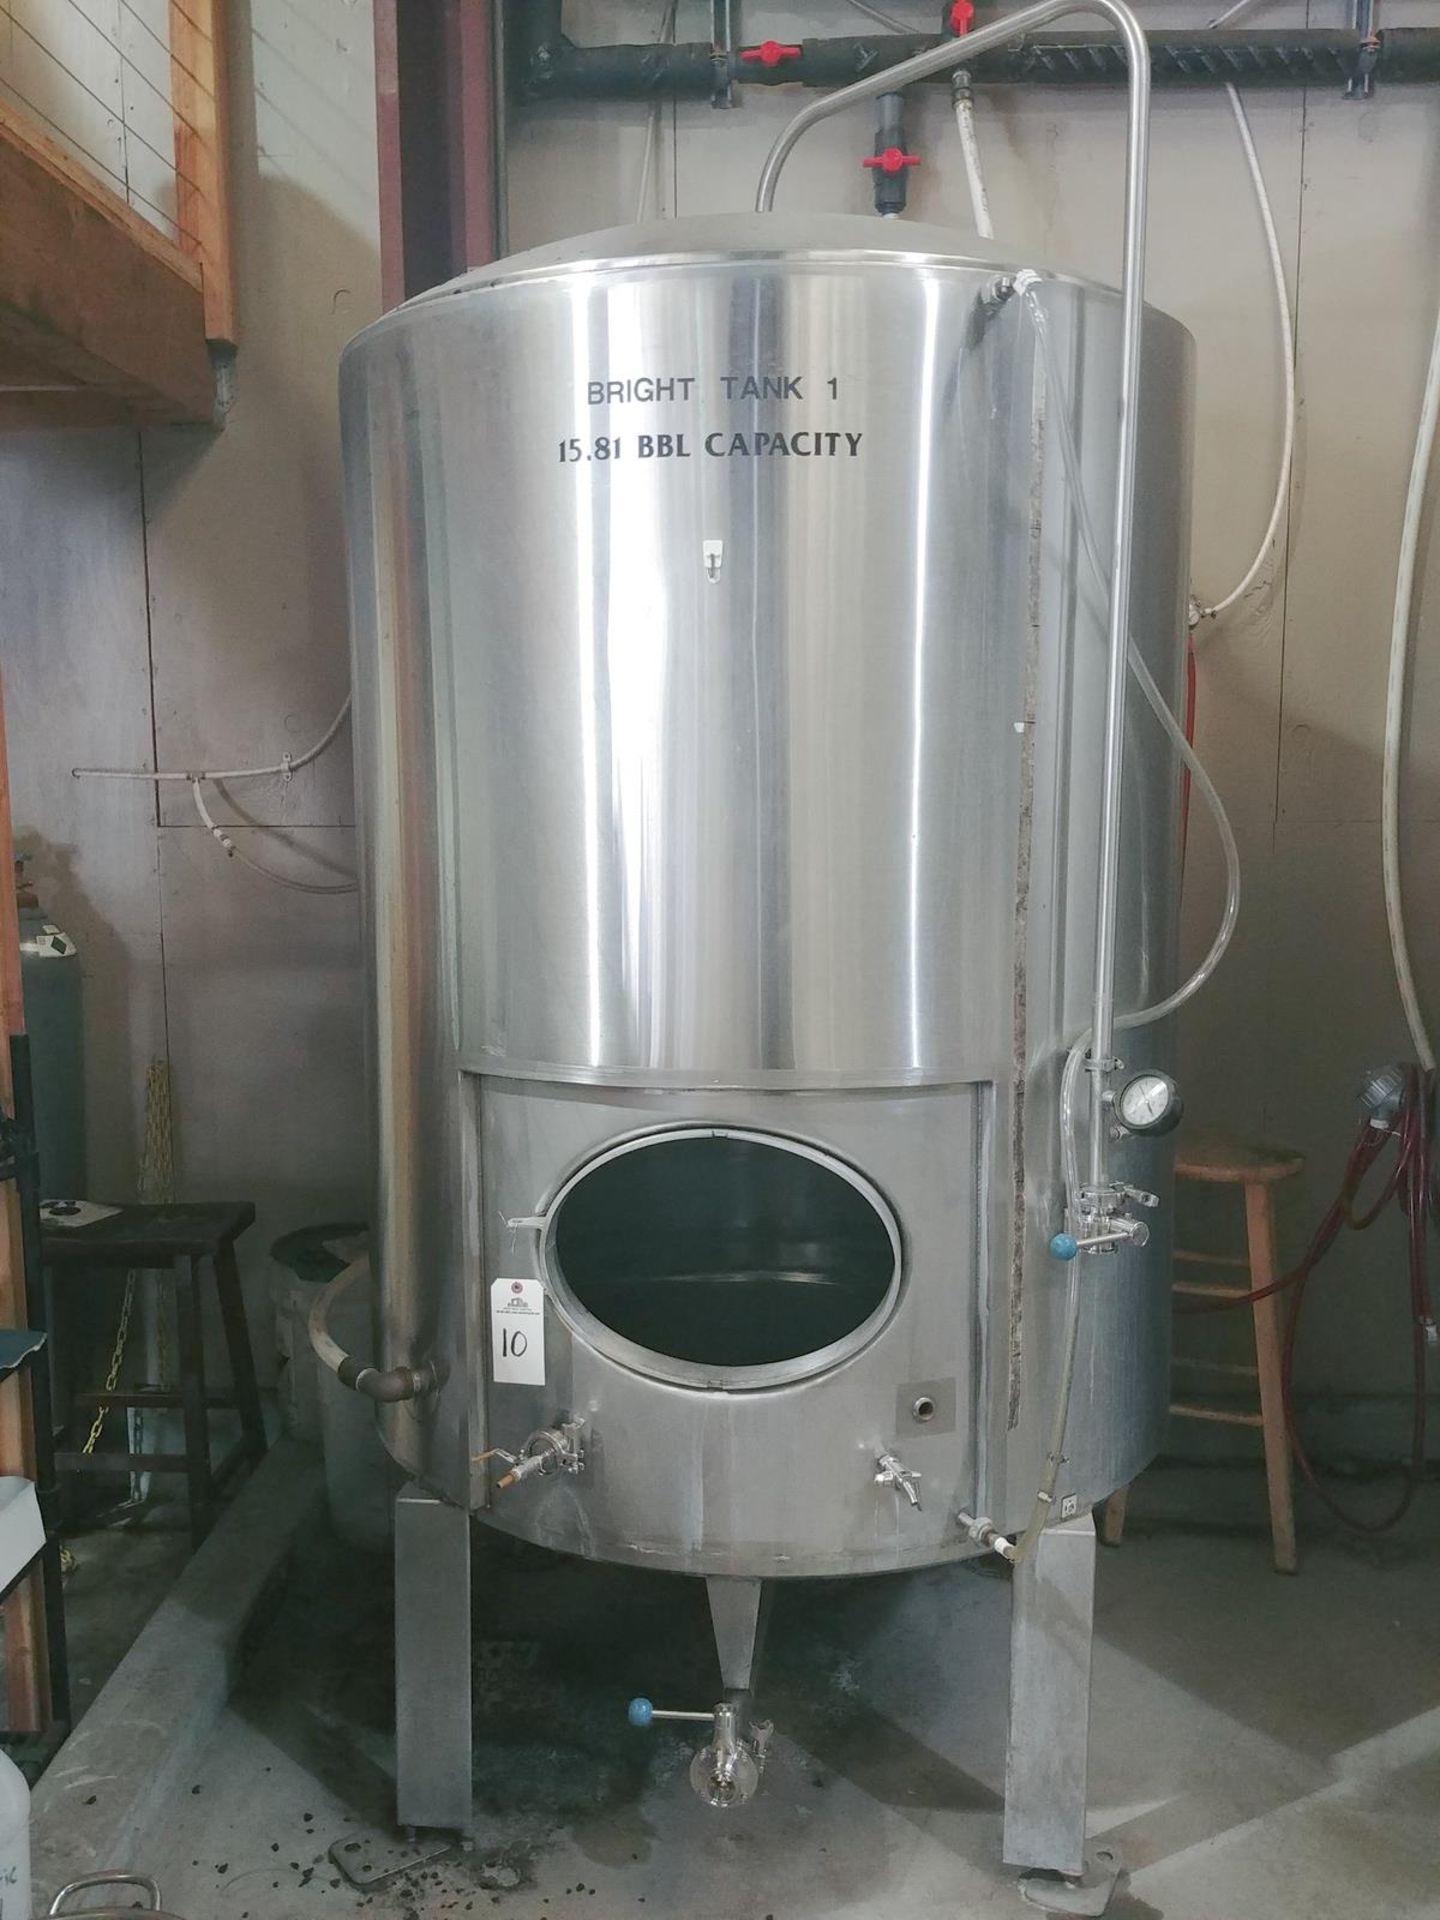 American Stainless 15 BBL Brite Tank, Glycol Jacketed, Approx Di - Sub to Bulk | Reqd Rig Fee: $550